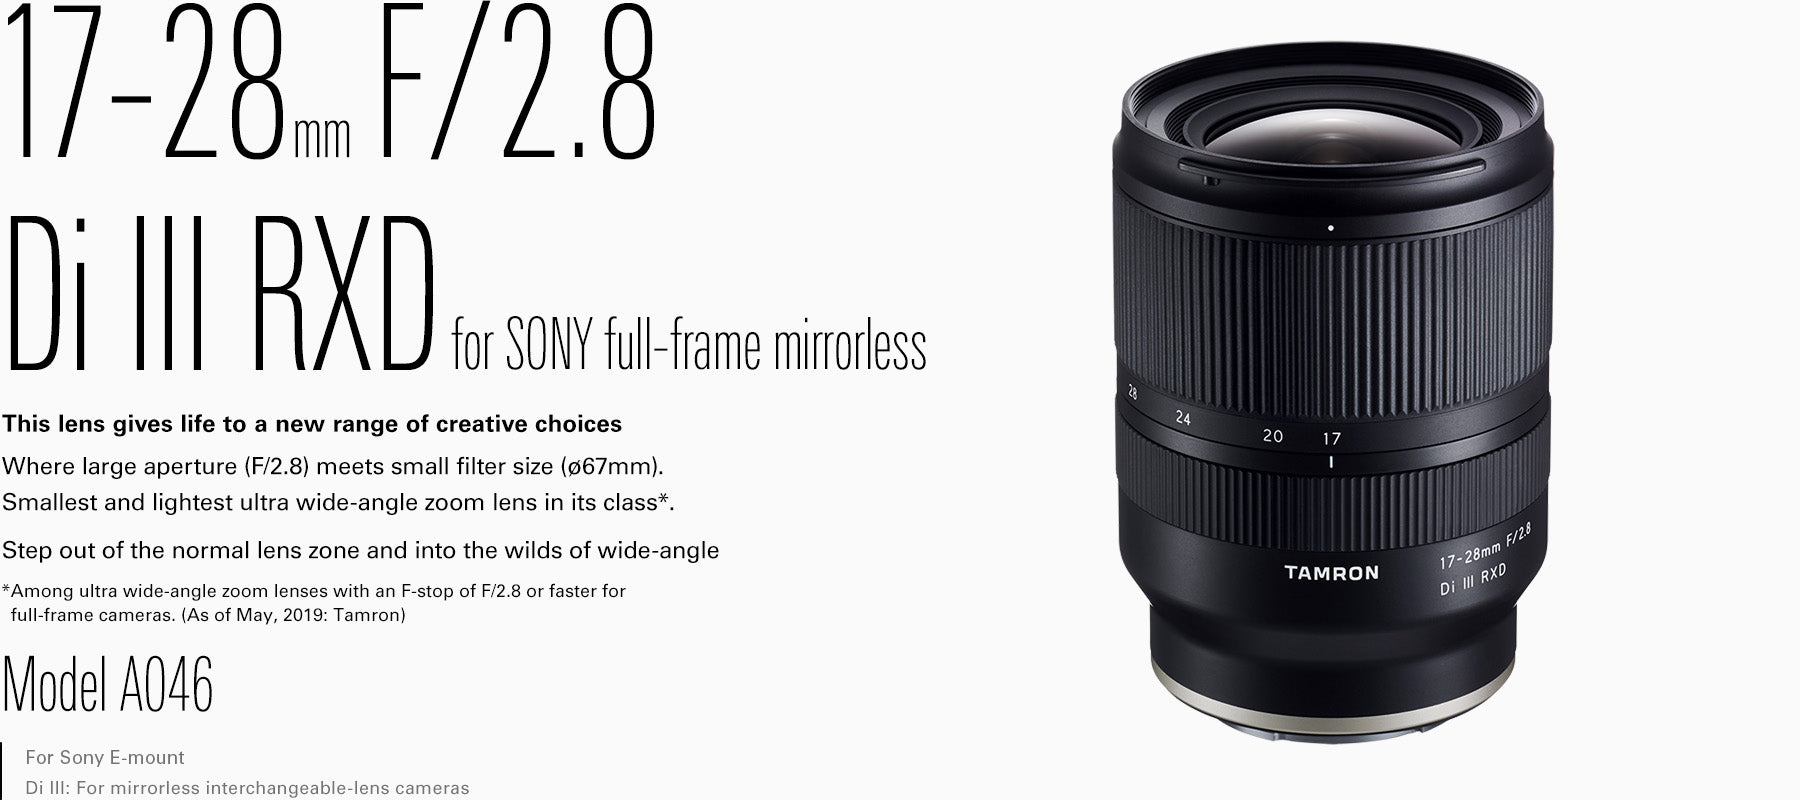 Tamron 17-28mm f/2.8 Di III RXD Lens for Sony E – Pro Camera Hawaii